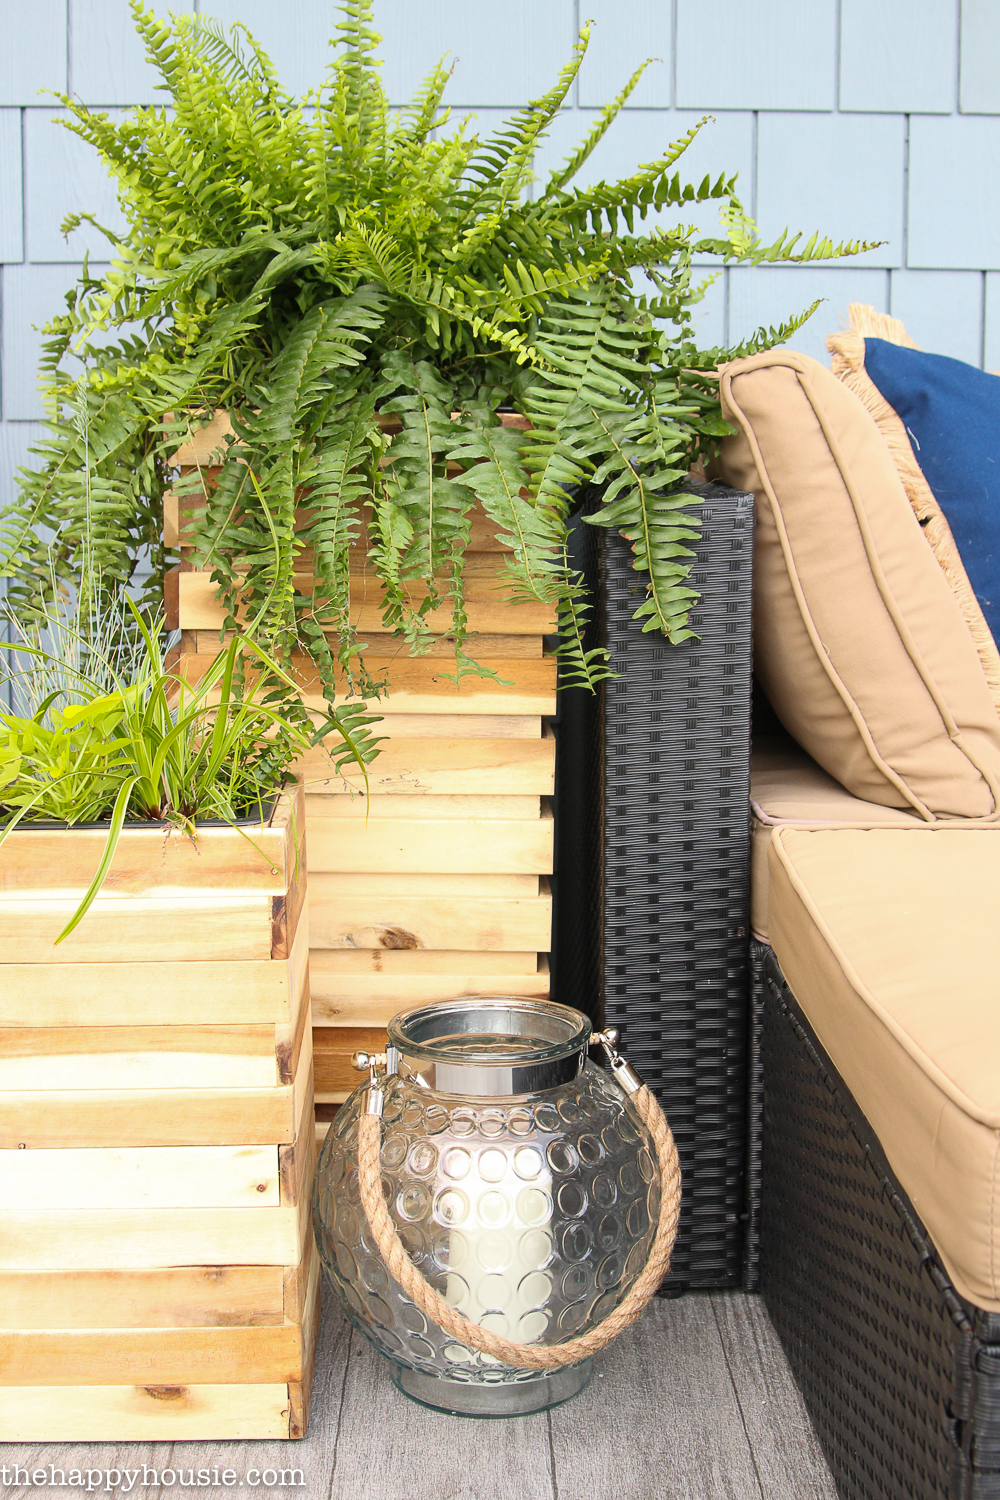 A large wooden planter beside the couch with a fern in it.